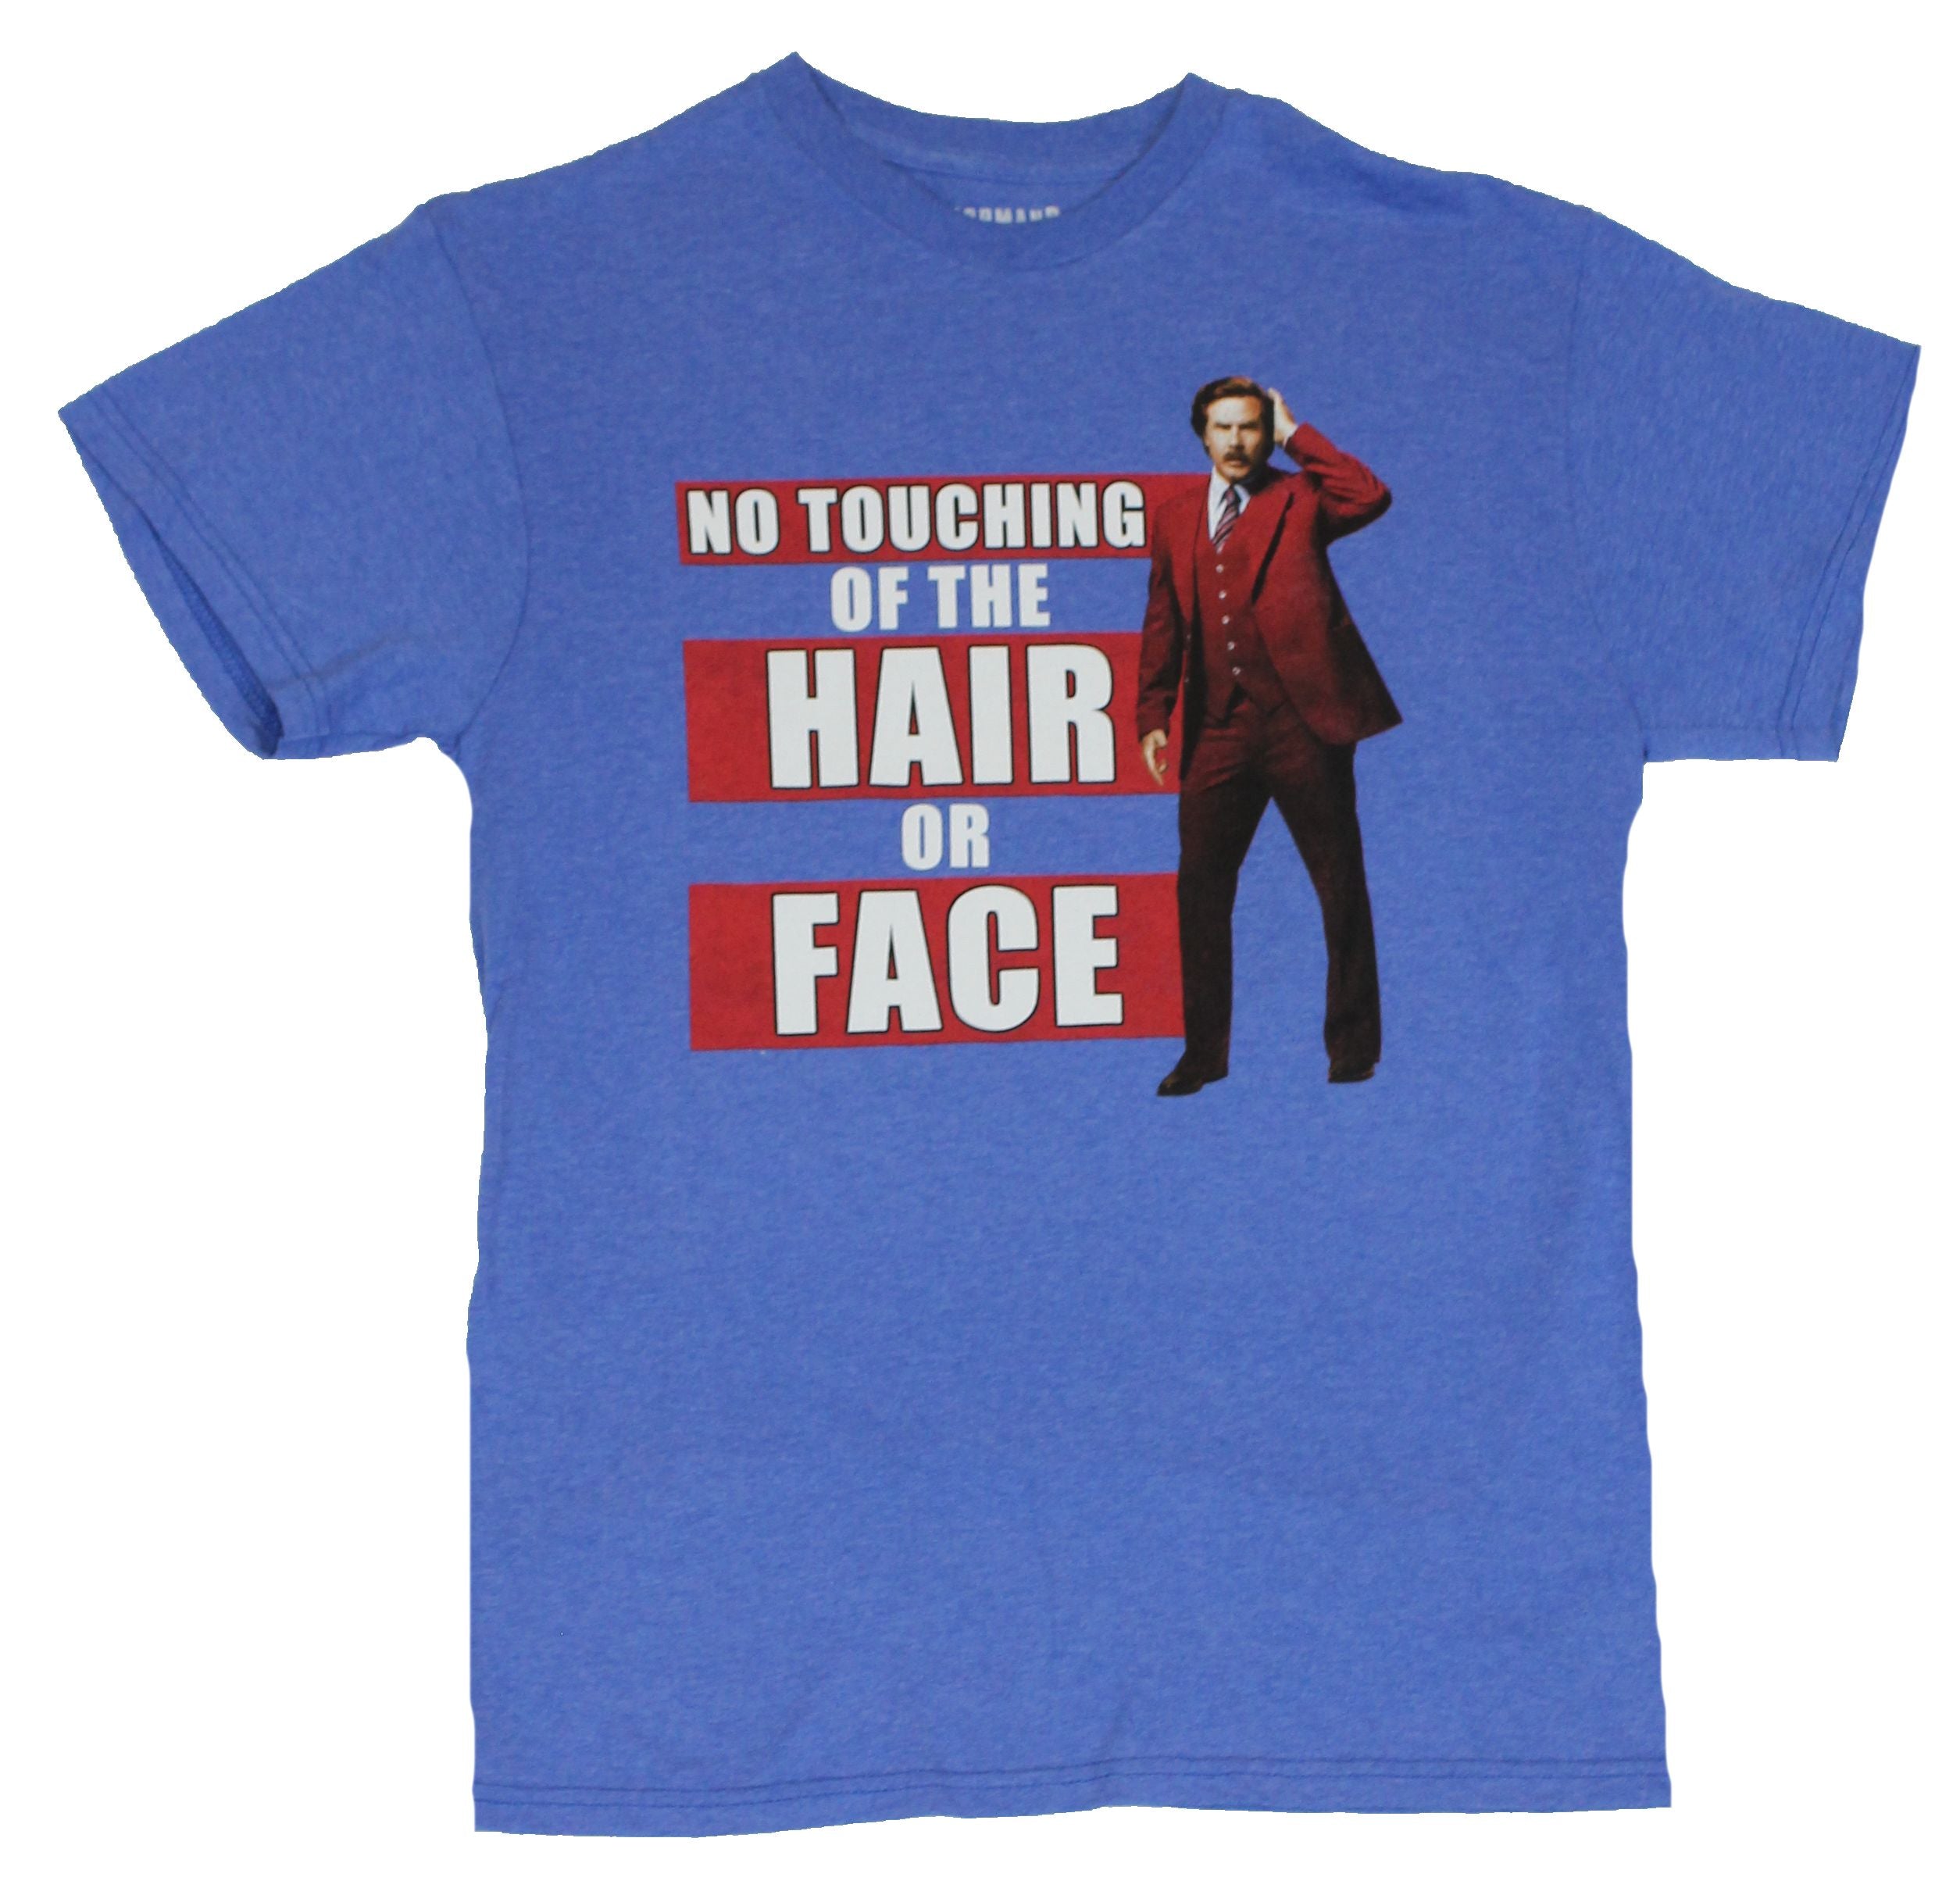 Anchorman Mens T-Shirt - "Do Not Touch the Hair or Face" Image